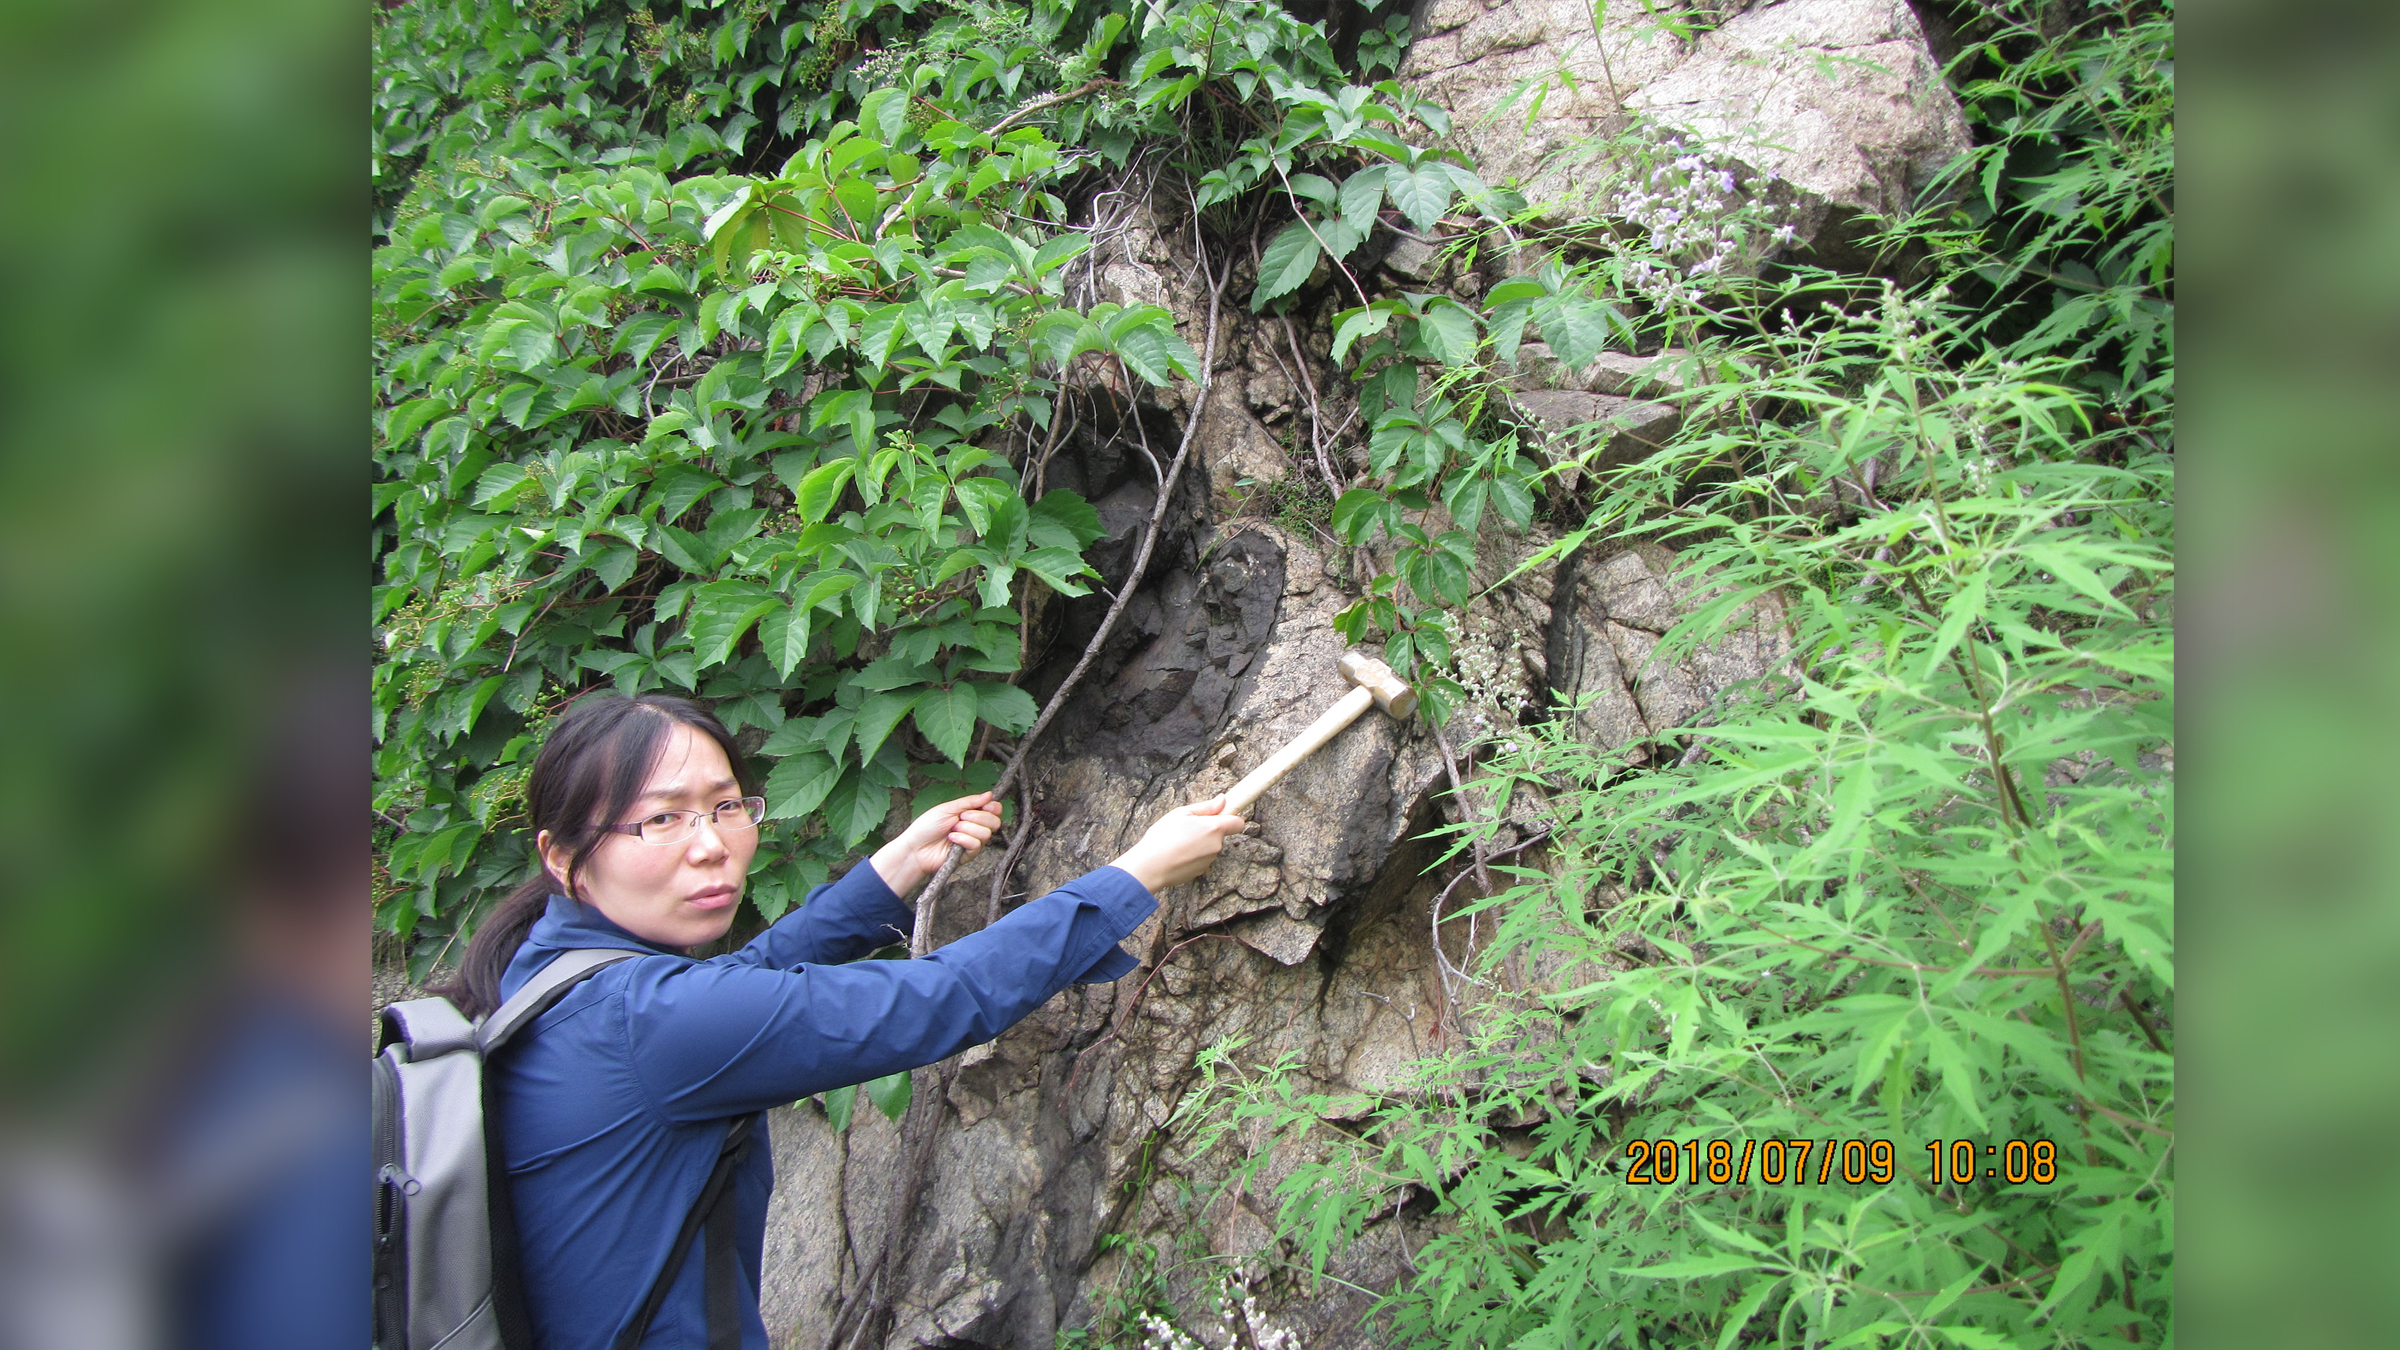 Lu Wang discovers dense brush at the Archean eclogite site in Shangying, China.